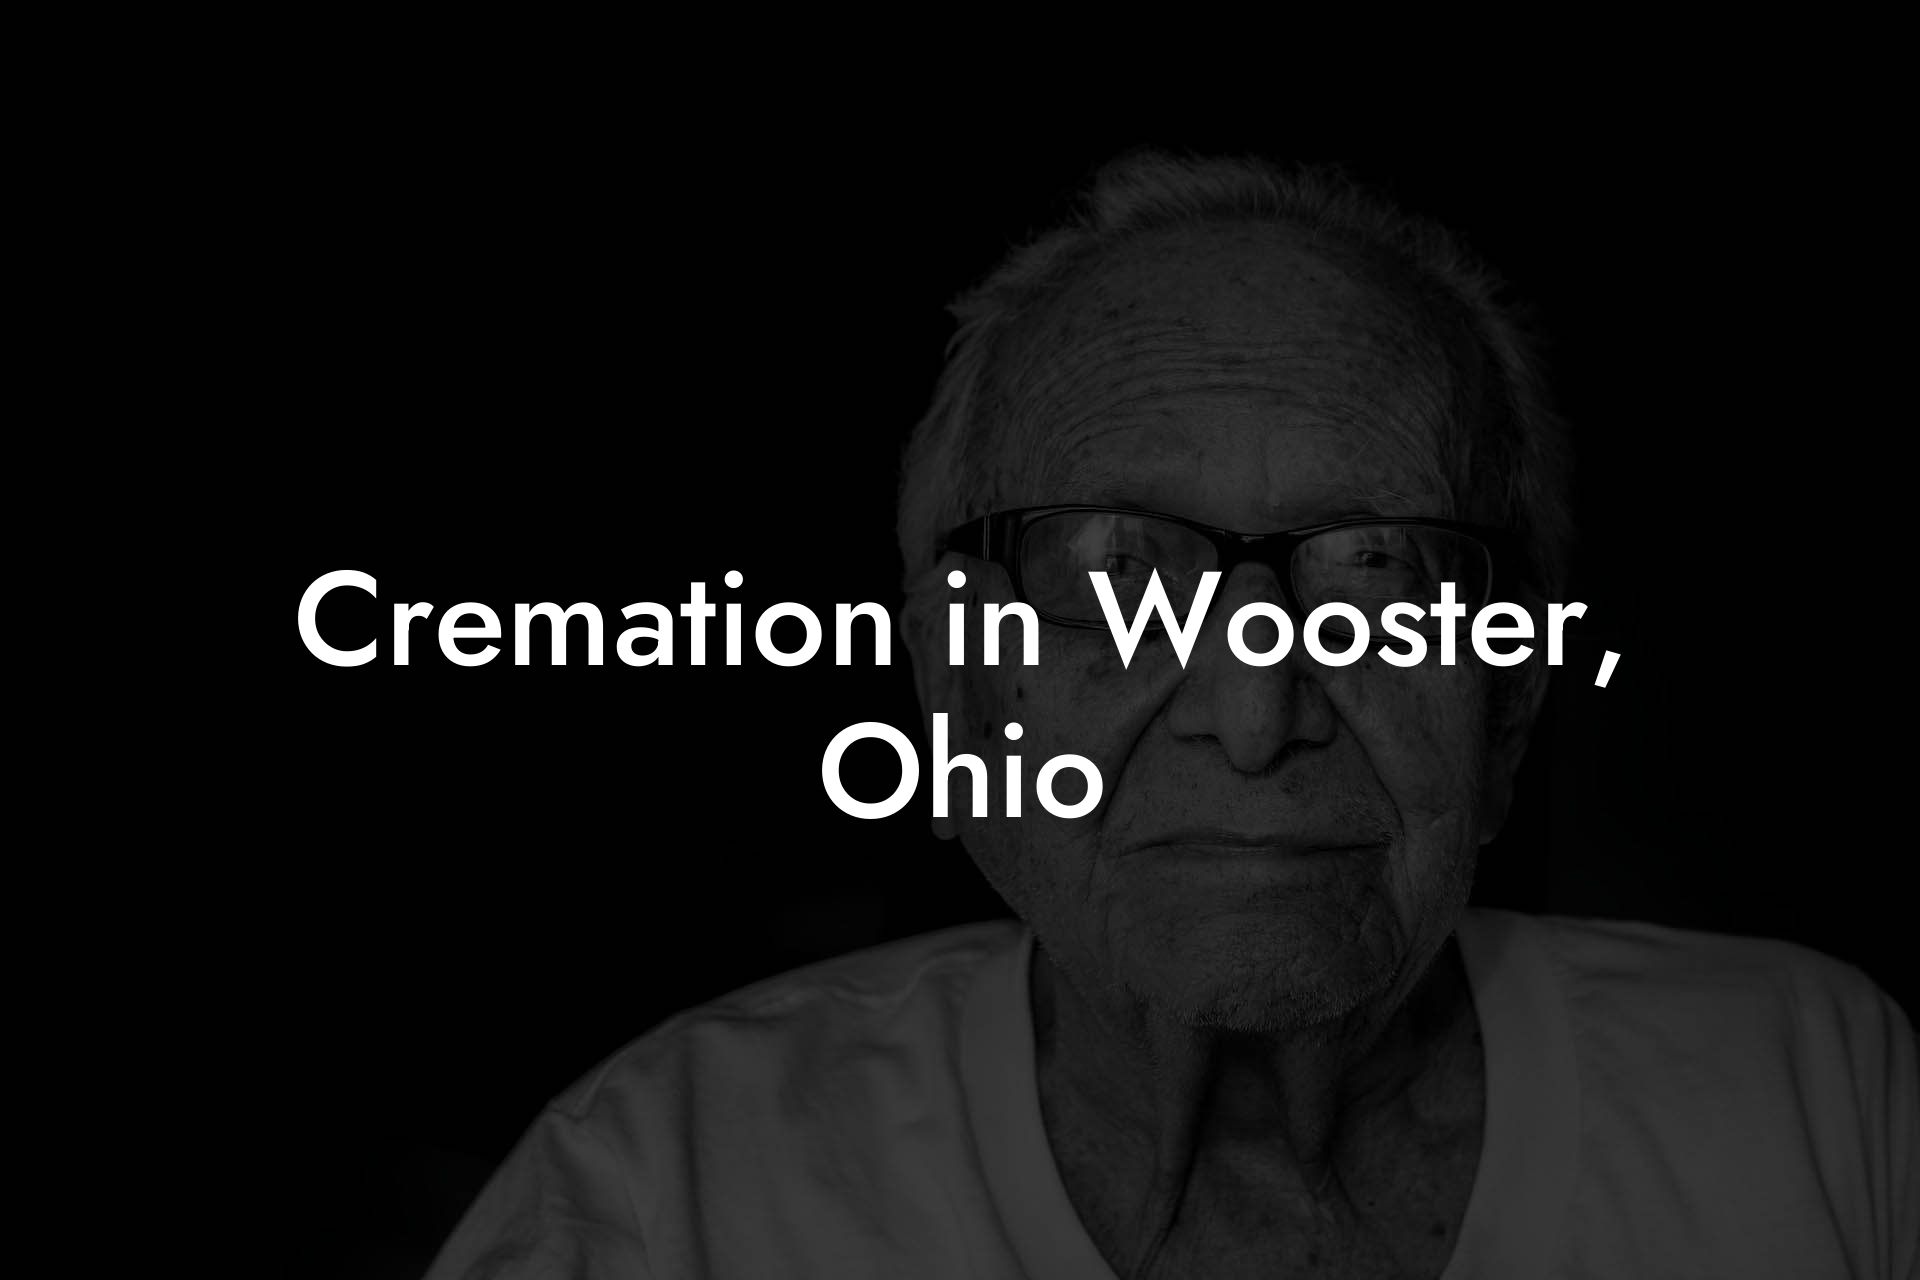 Cremation in Wooster, Ohio